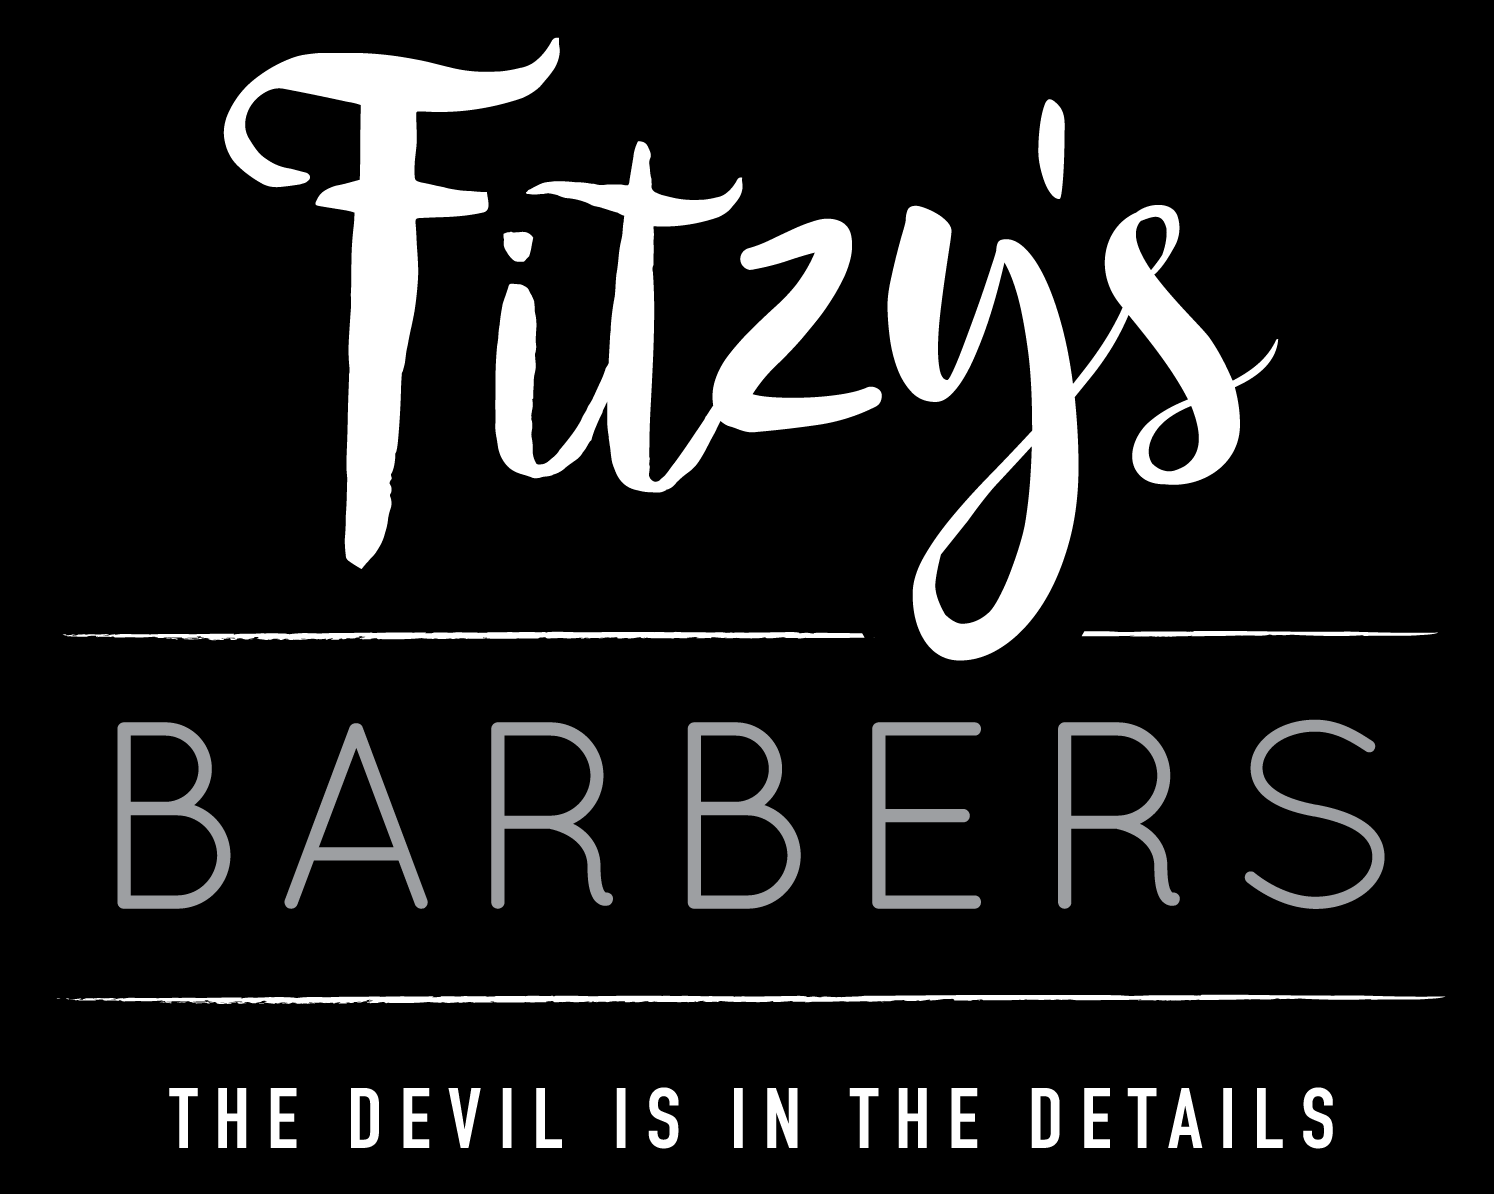 Fitzys Barbers